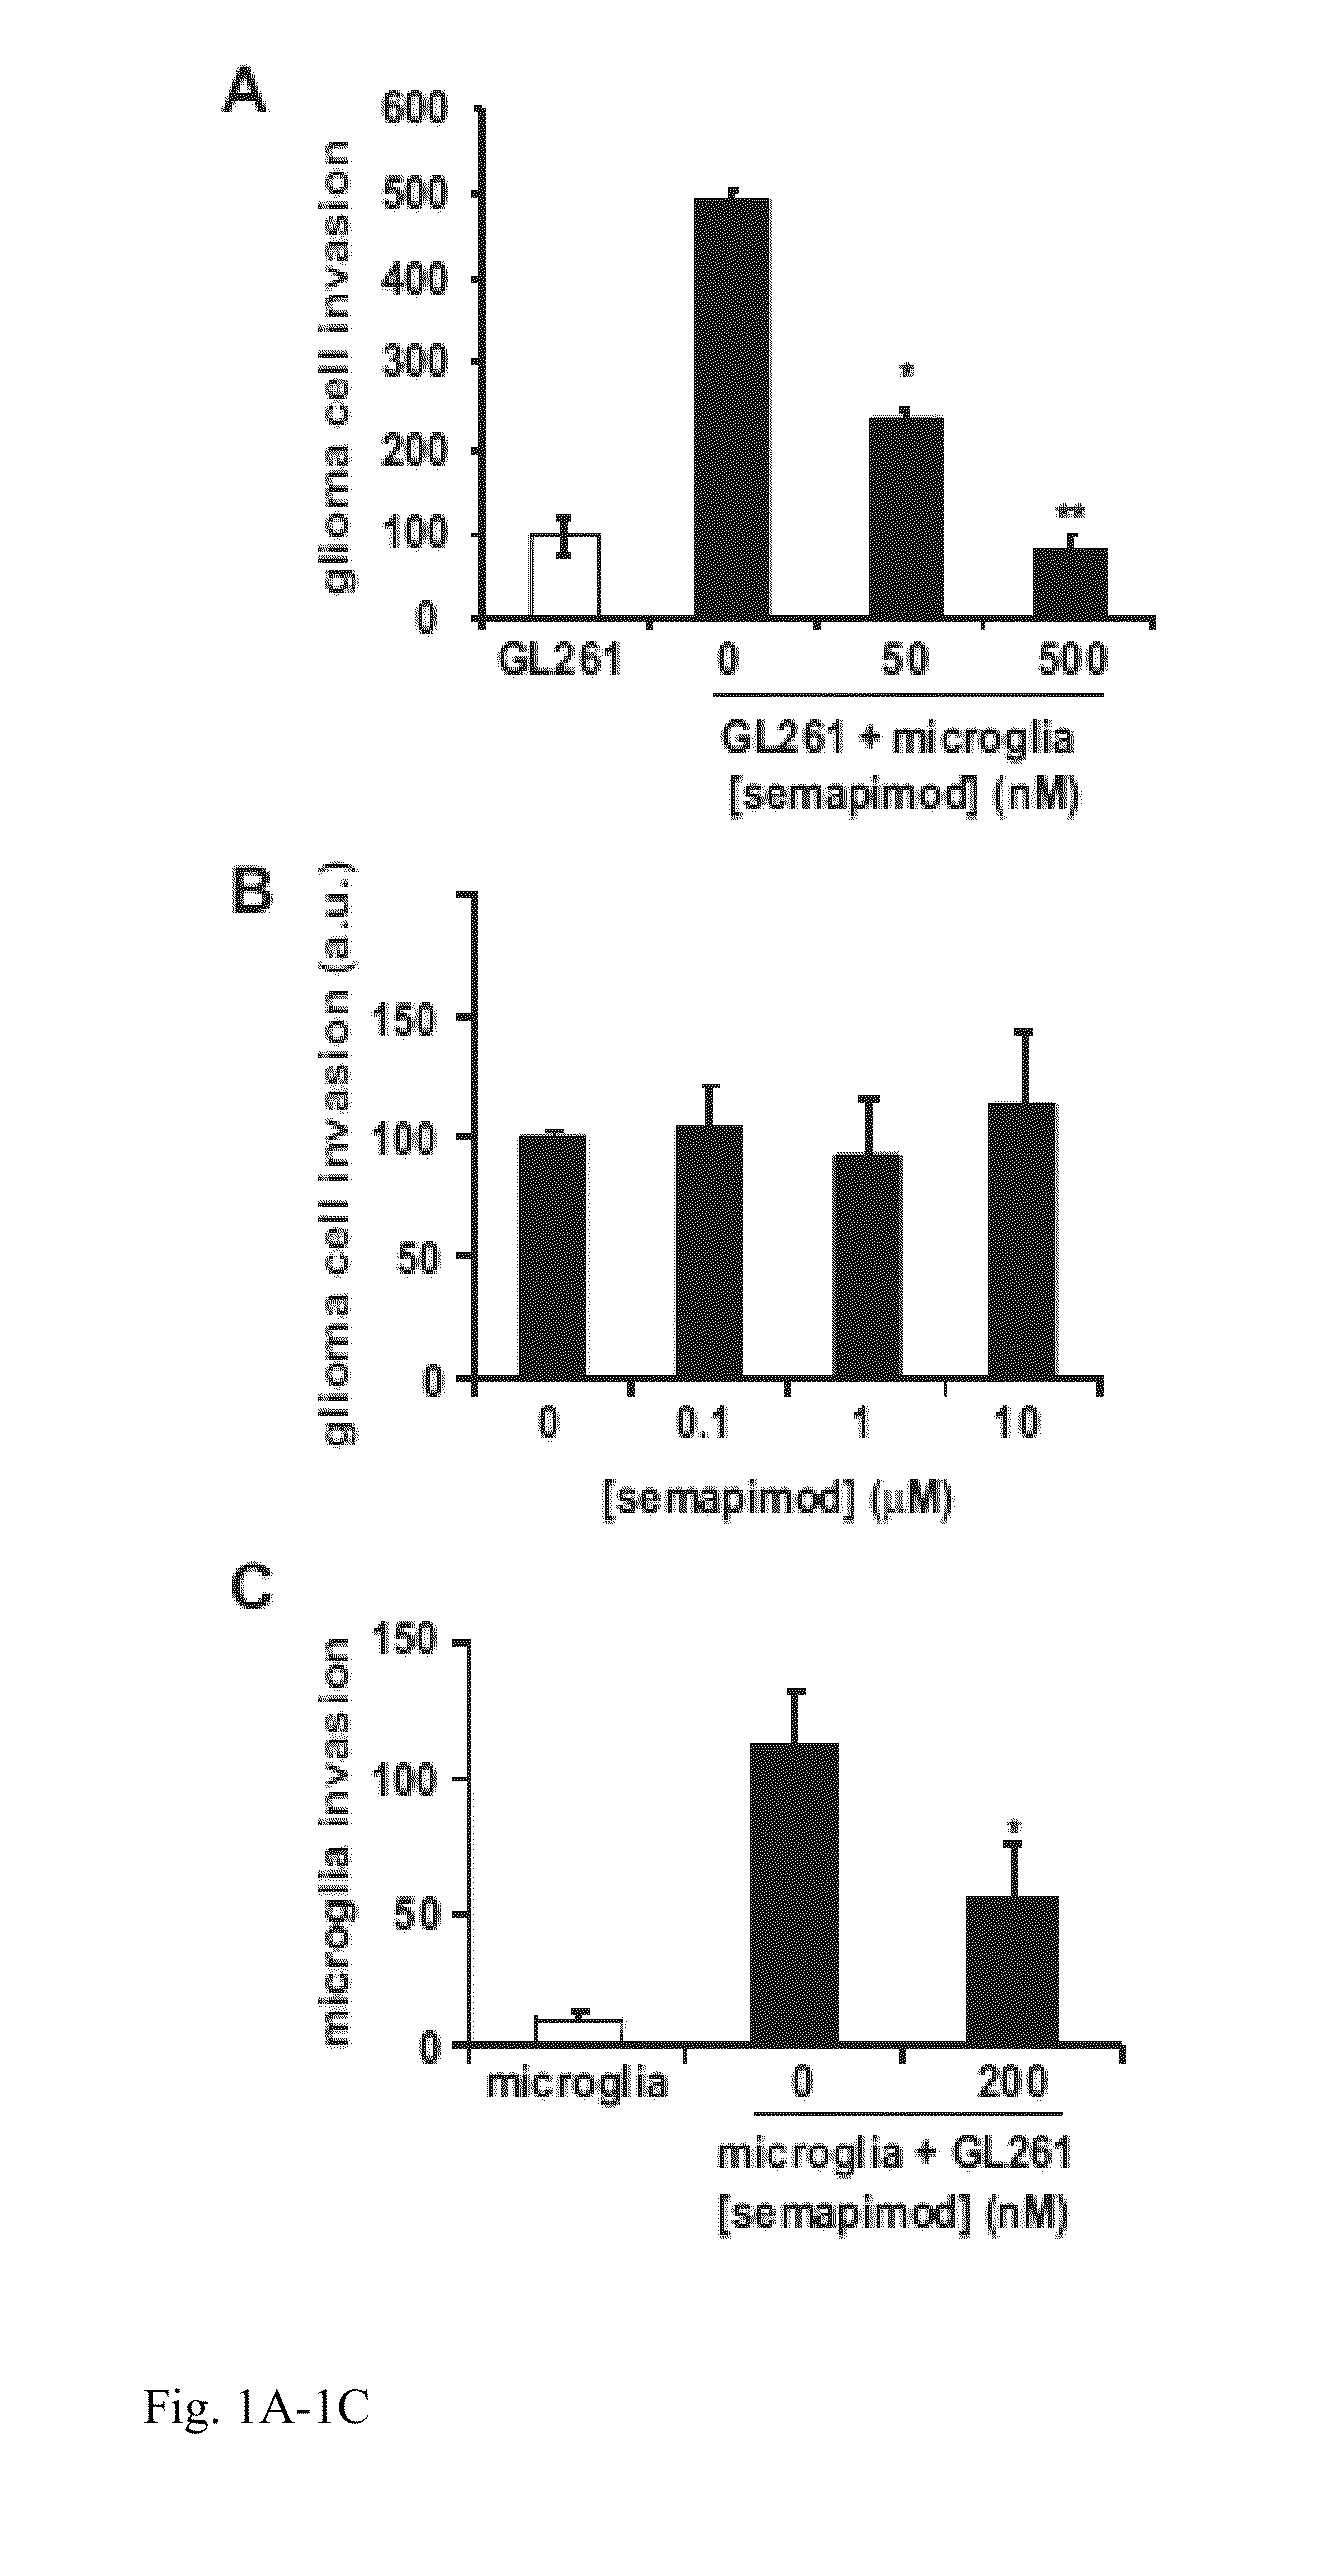 Method for treating glioblastomas and other tumors